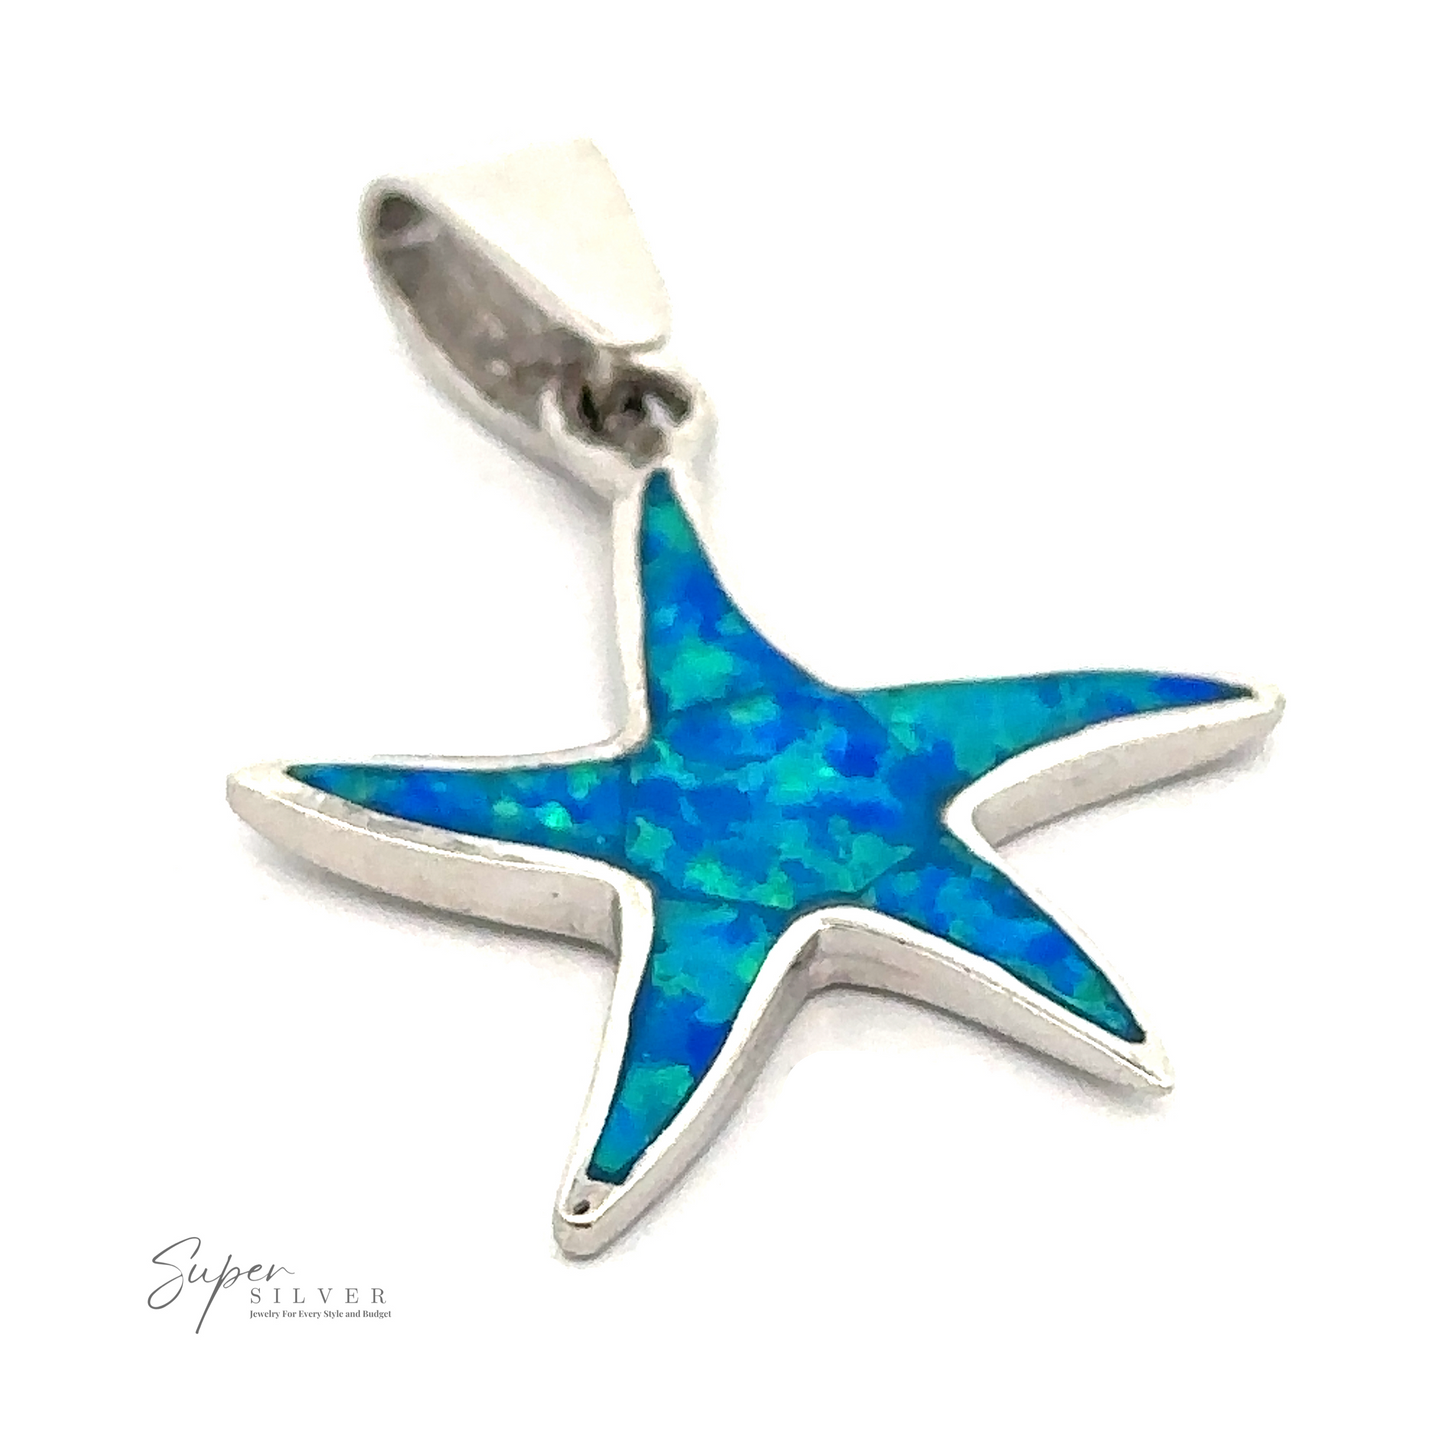 The Blue Opal Sea Star Pendant features iridescent blue-green inlays bordered by silver. The simple and elegant design includes a small loop at the top for attaching to a chain, making it a perfect piece of ocean jewelry.